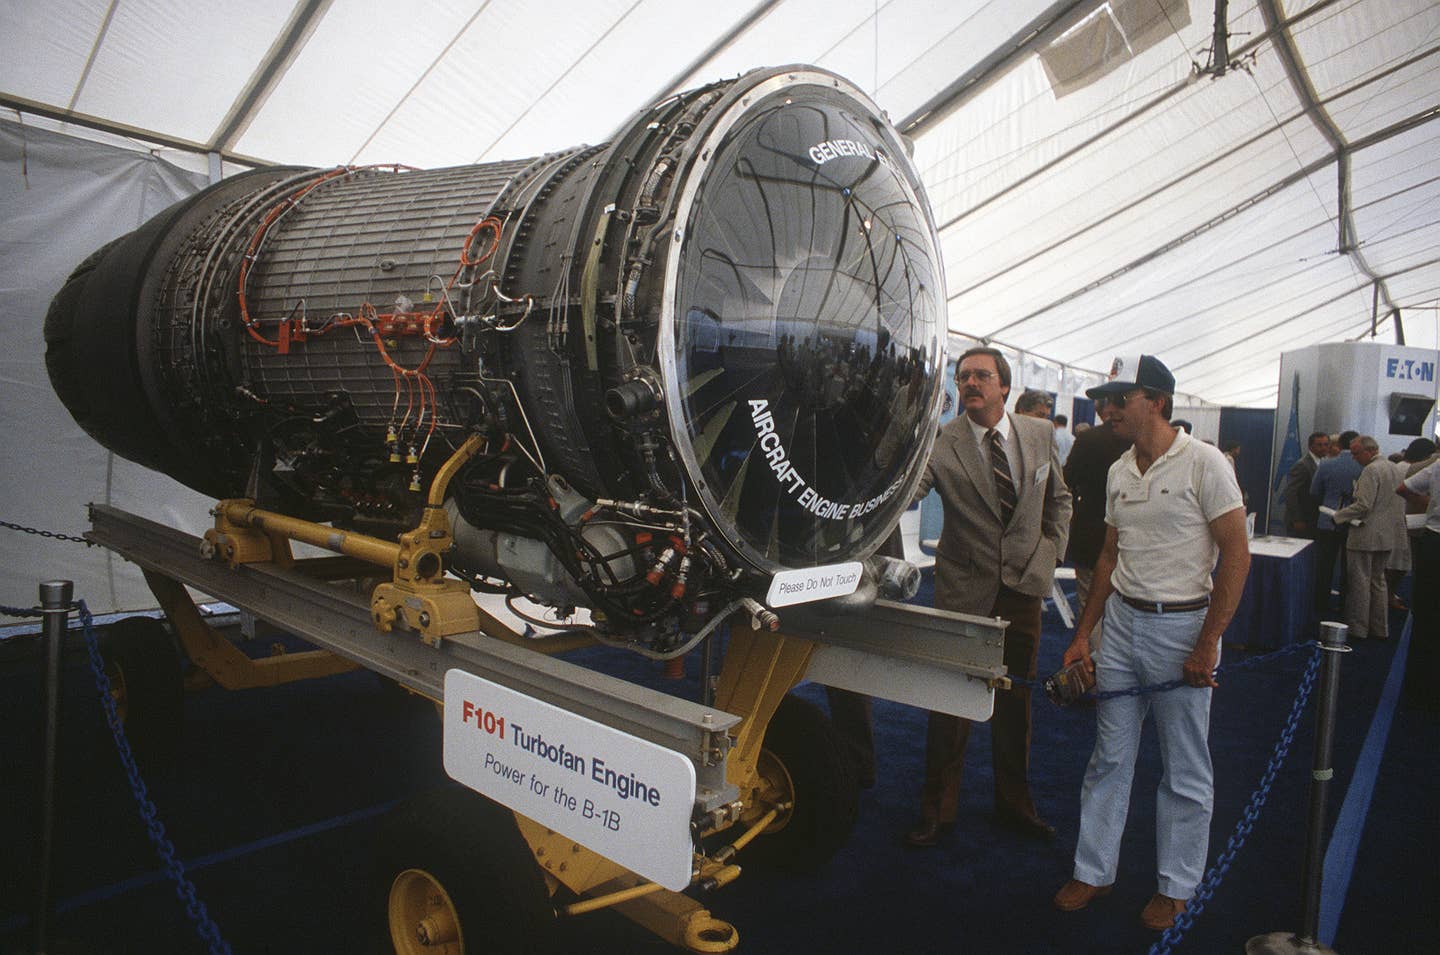 message-editor%2F1610130215632-visitors_attending_the_rollout_ceremony_for_the_first_production_model_b-1b_aircraft_examine_a_model_of_a_f101_turbofan_jet_engine_at_the_rockwell_international_facility._four_f-101_engines_power_the_b-1b.jpg